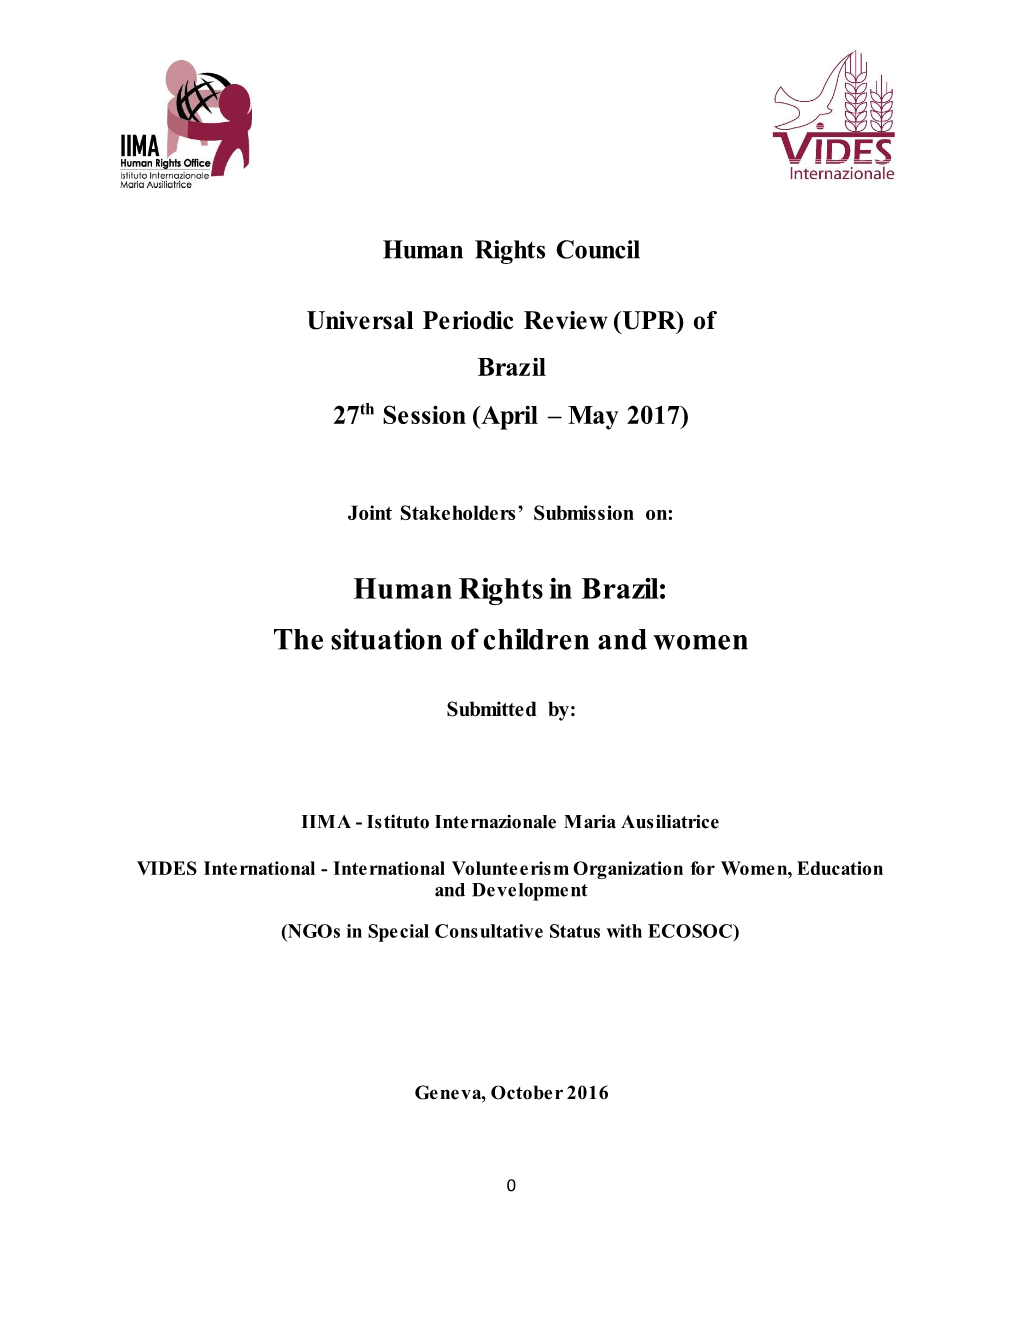 Human Rights in Brazil: the Situation of Children and Women